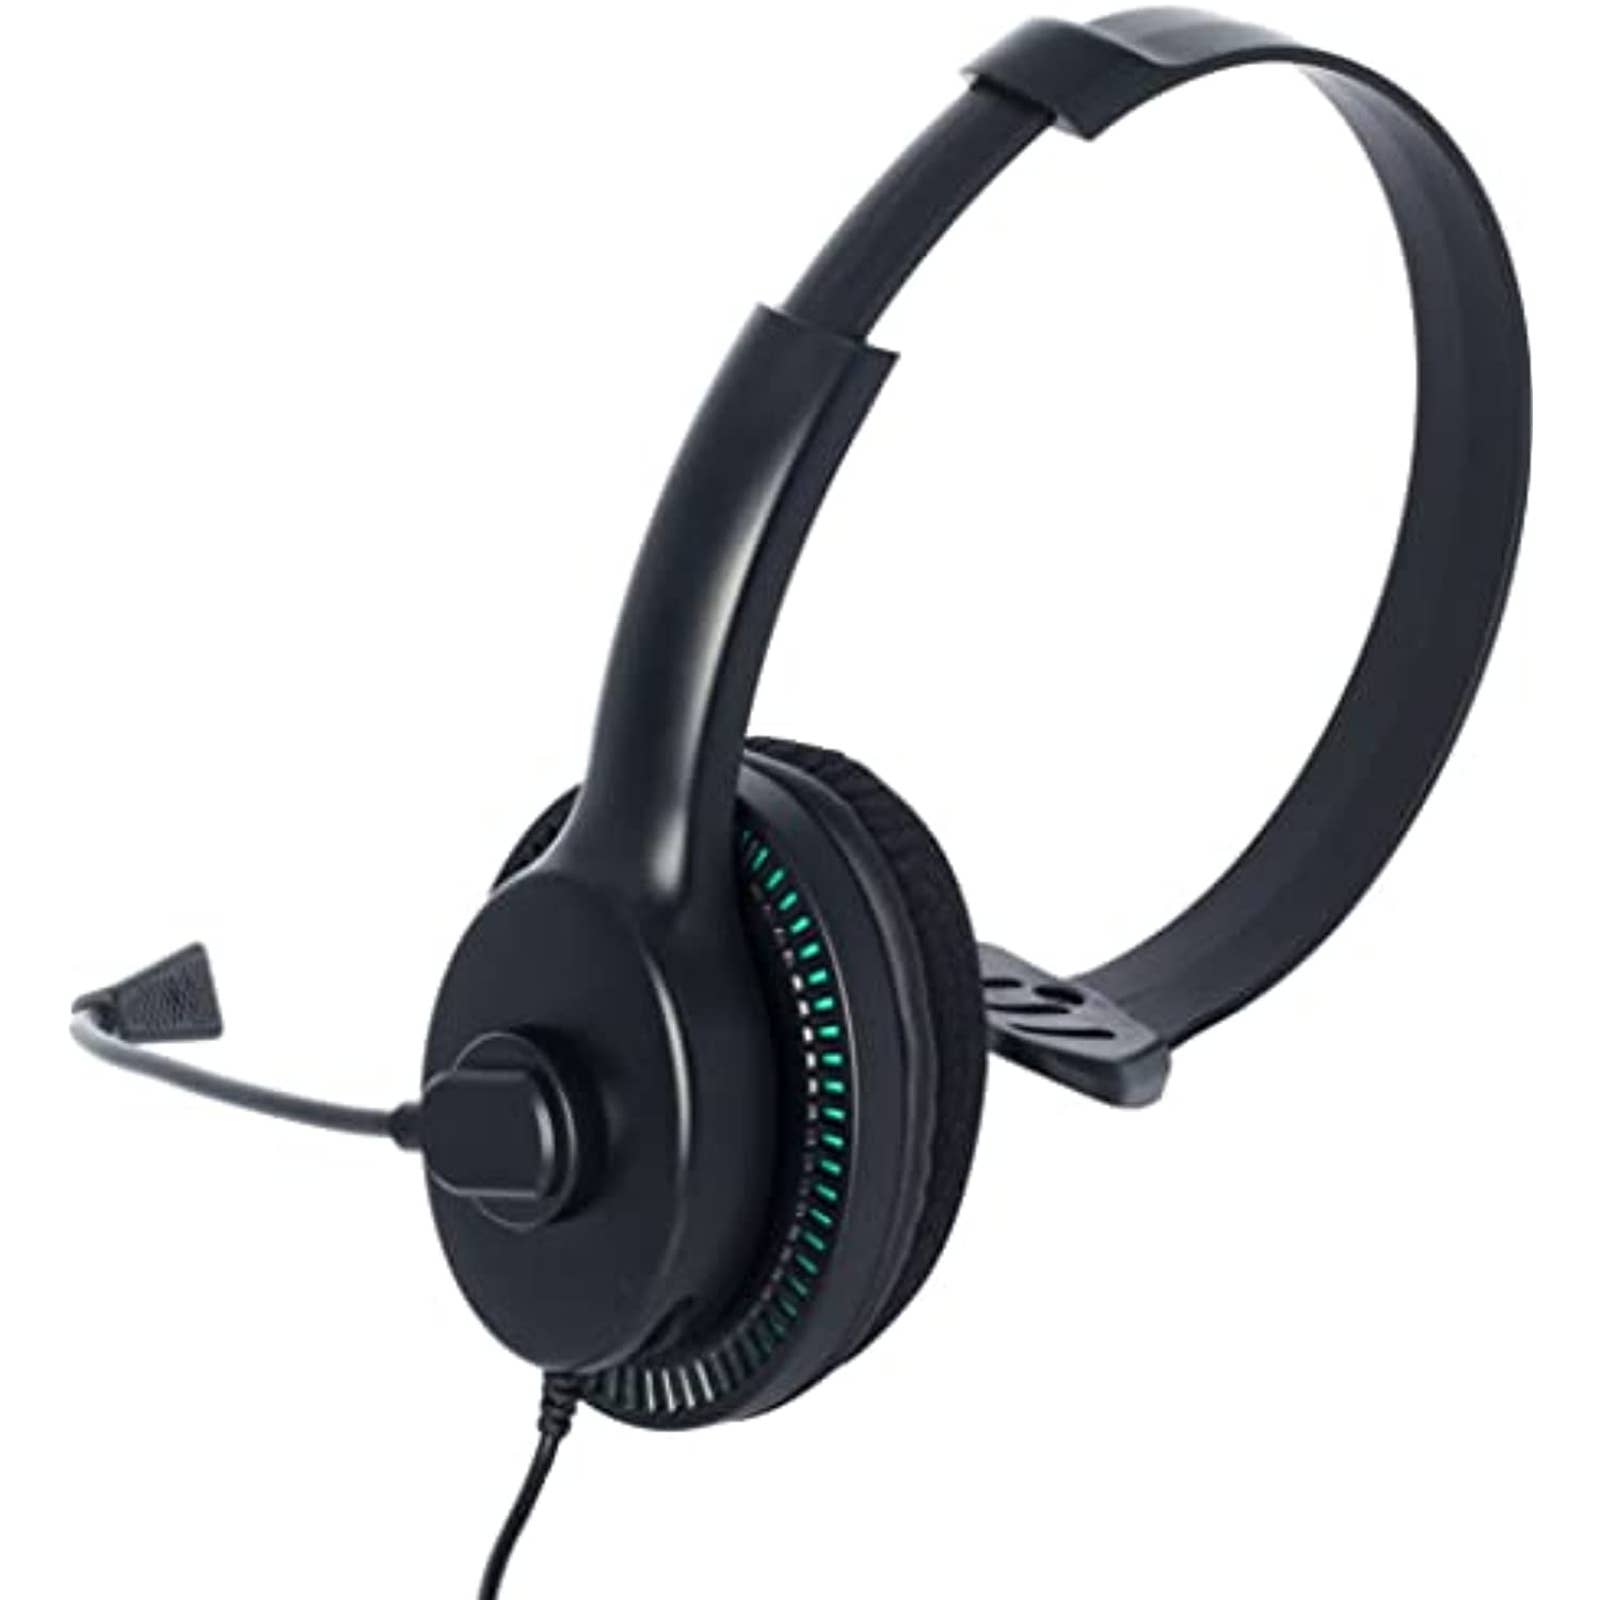 Insignia - NS-XB1MCHAT Wired Chat Headset for Xbox Series X | S and Xbox One - Black/Green